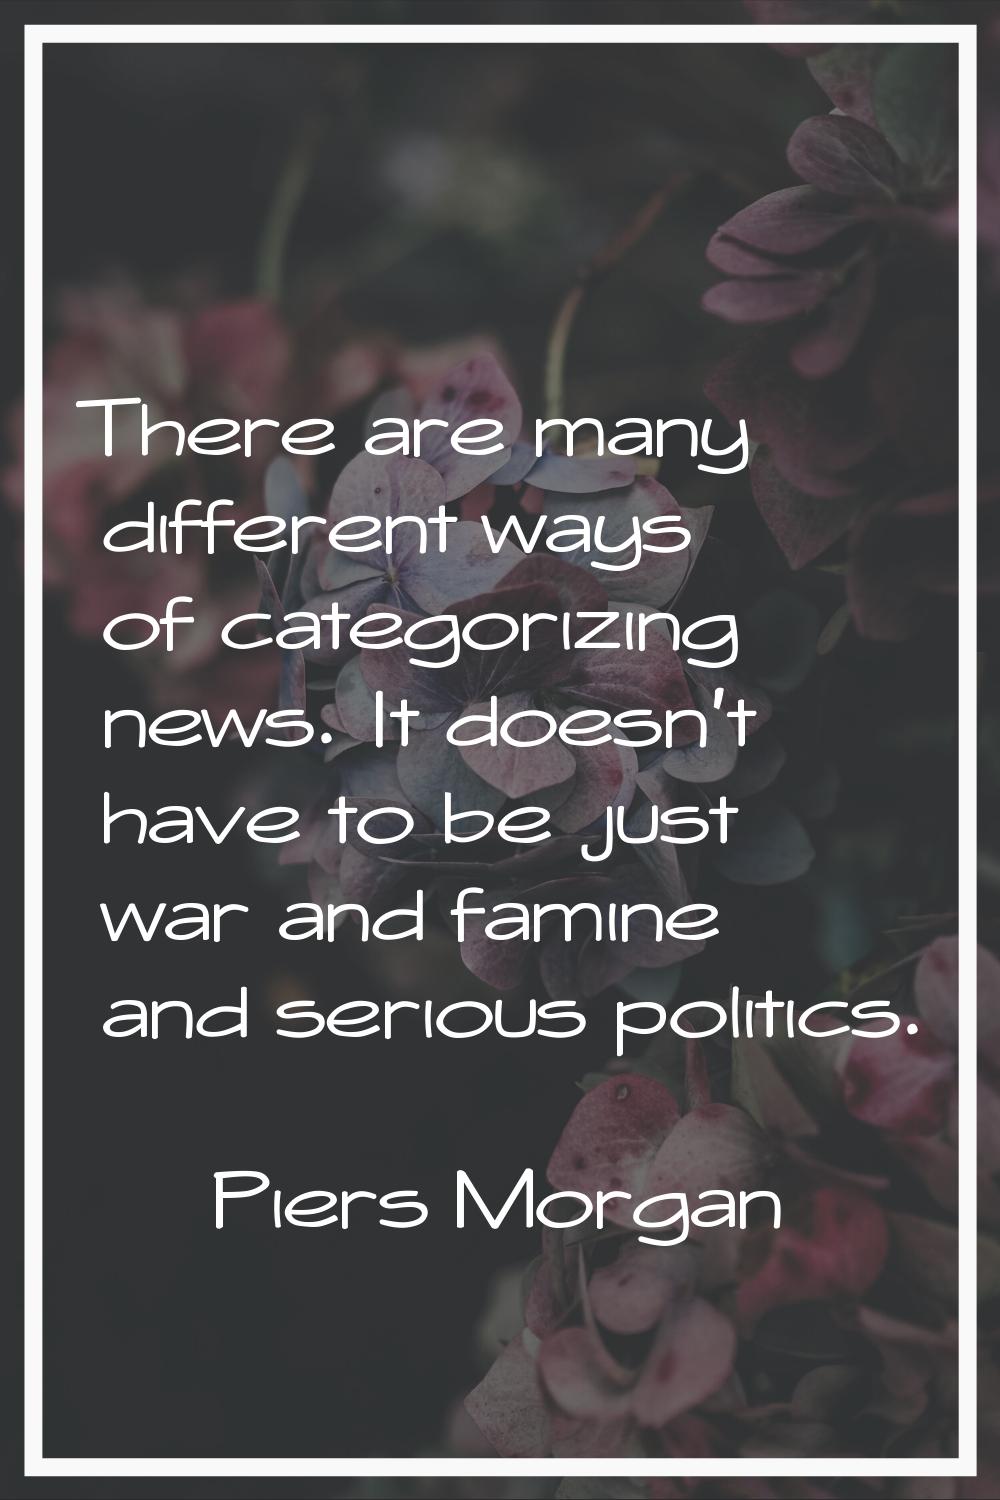 There are many different ways of categorizing news. It doesn't have to be just war and famine and s